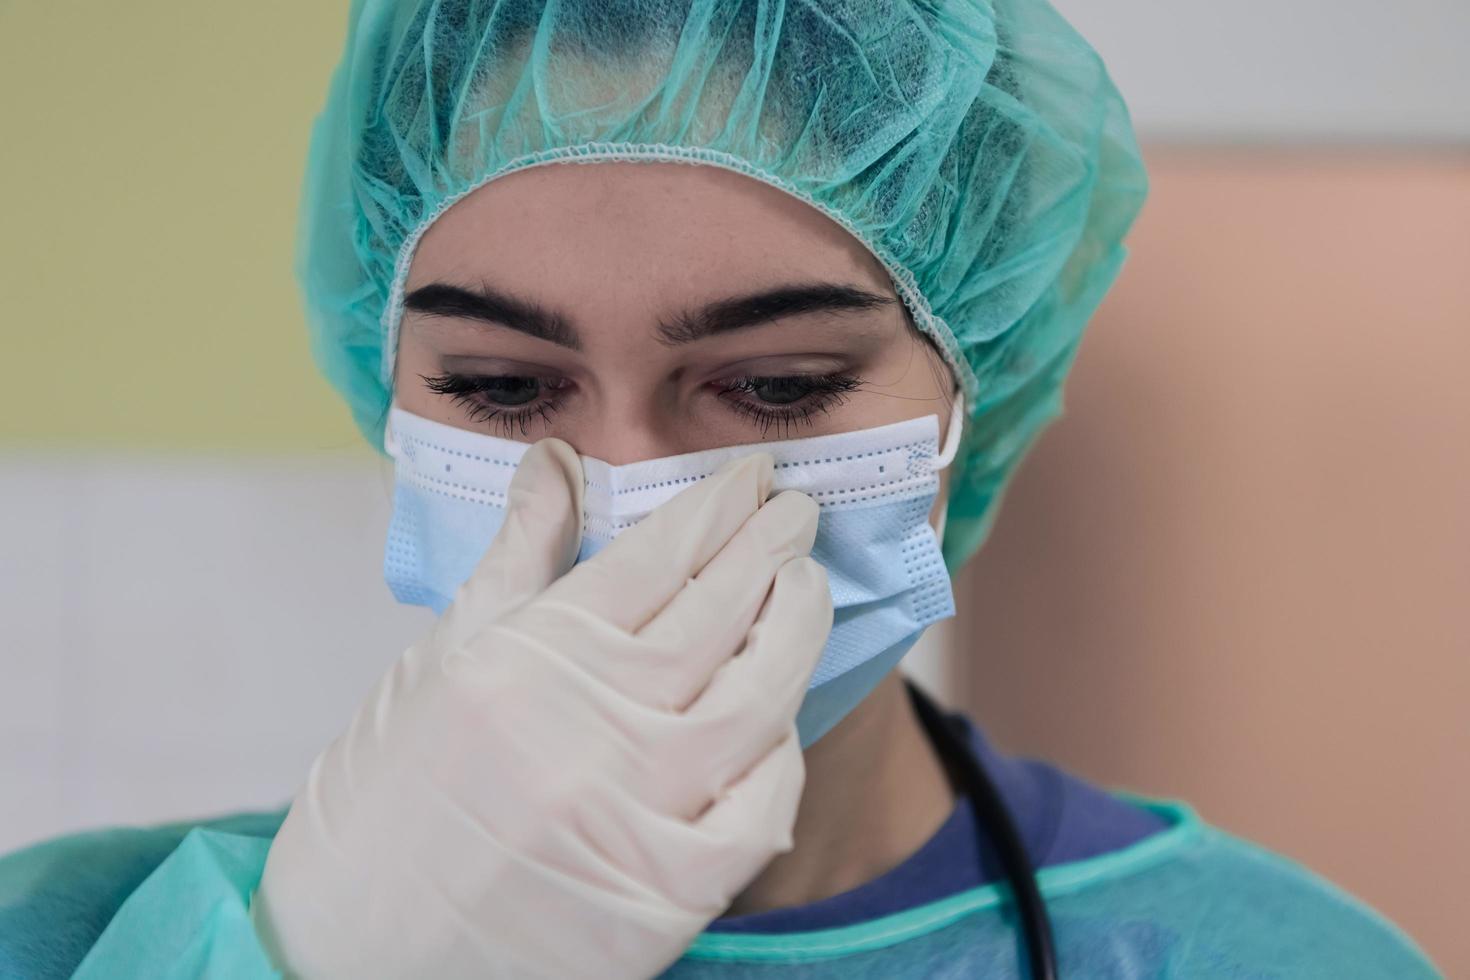 The female animal surgeon or veterinarian puts on a medical face mask. Doctor is preparing for surgery in the operation room. Medicine and healthcare photo